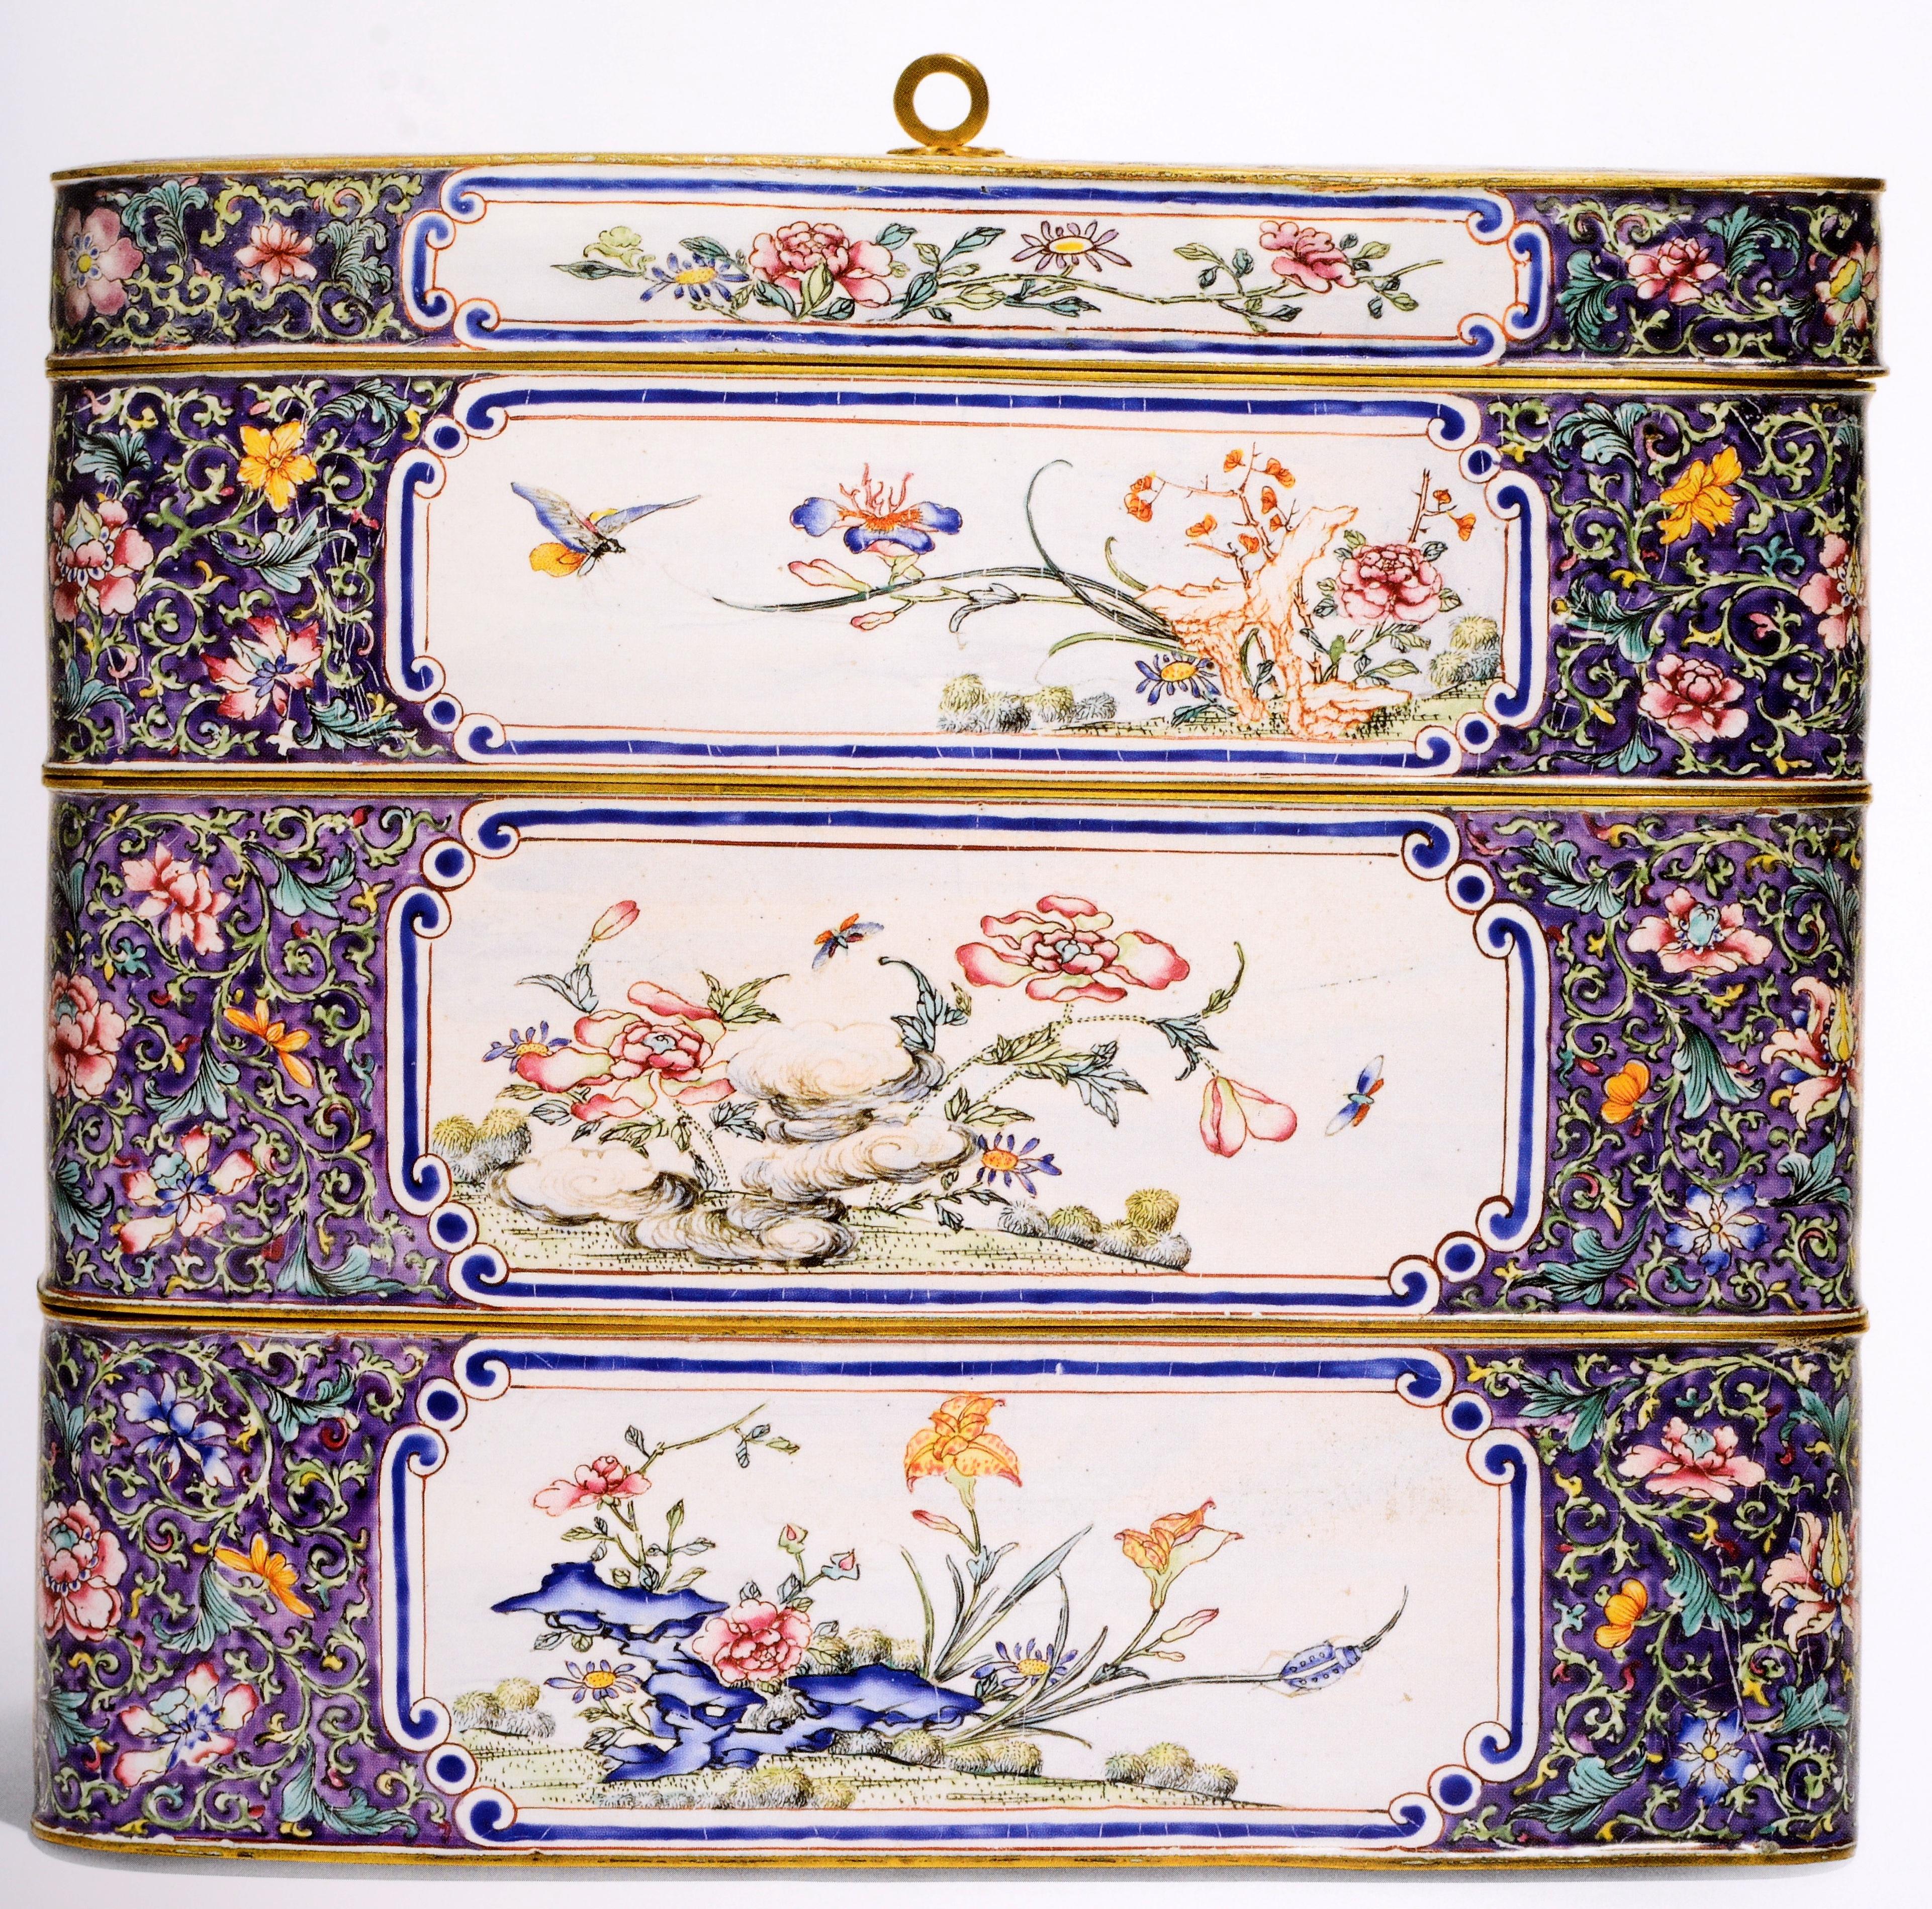 Treasures of the Qing Court, a Personal Perspective London 7 Nov. 2012 Sotheby's For Sale 4